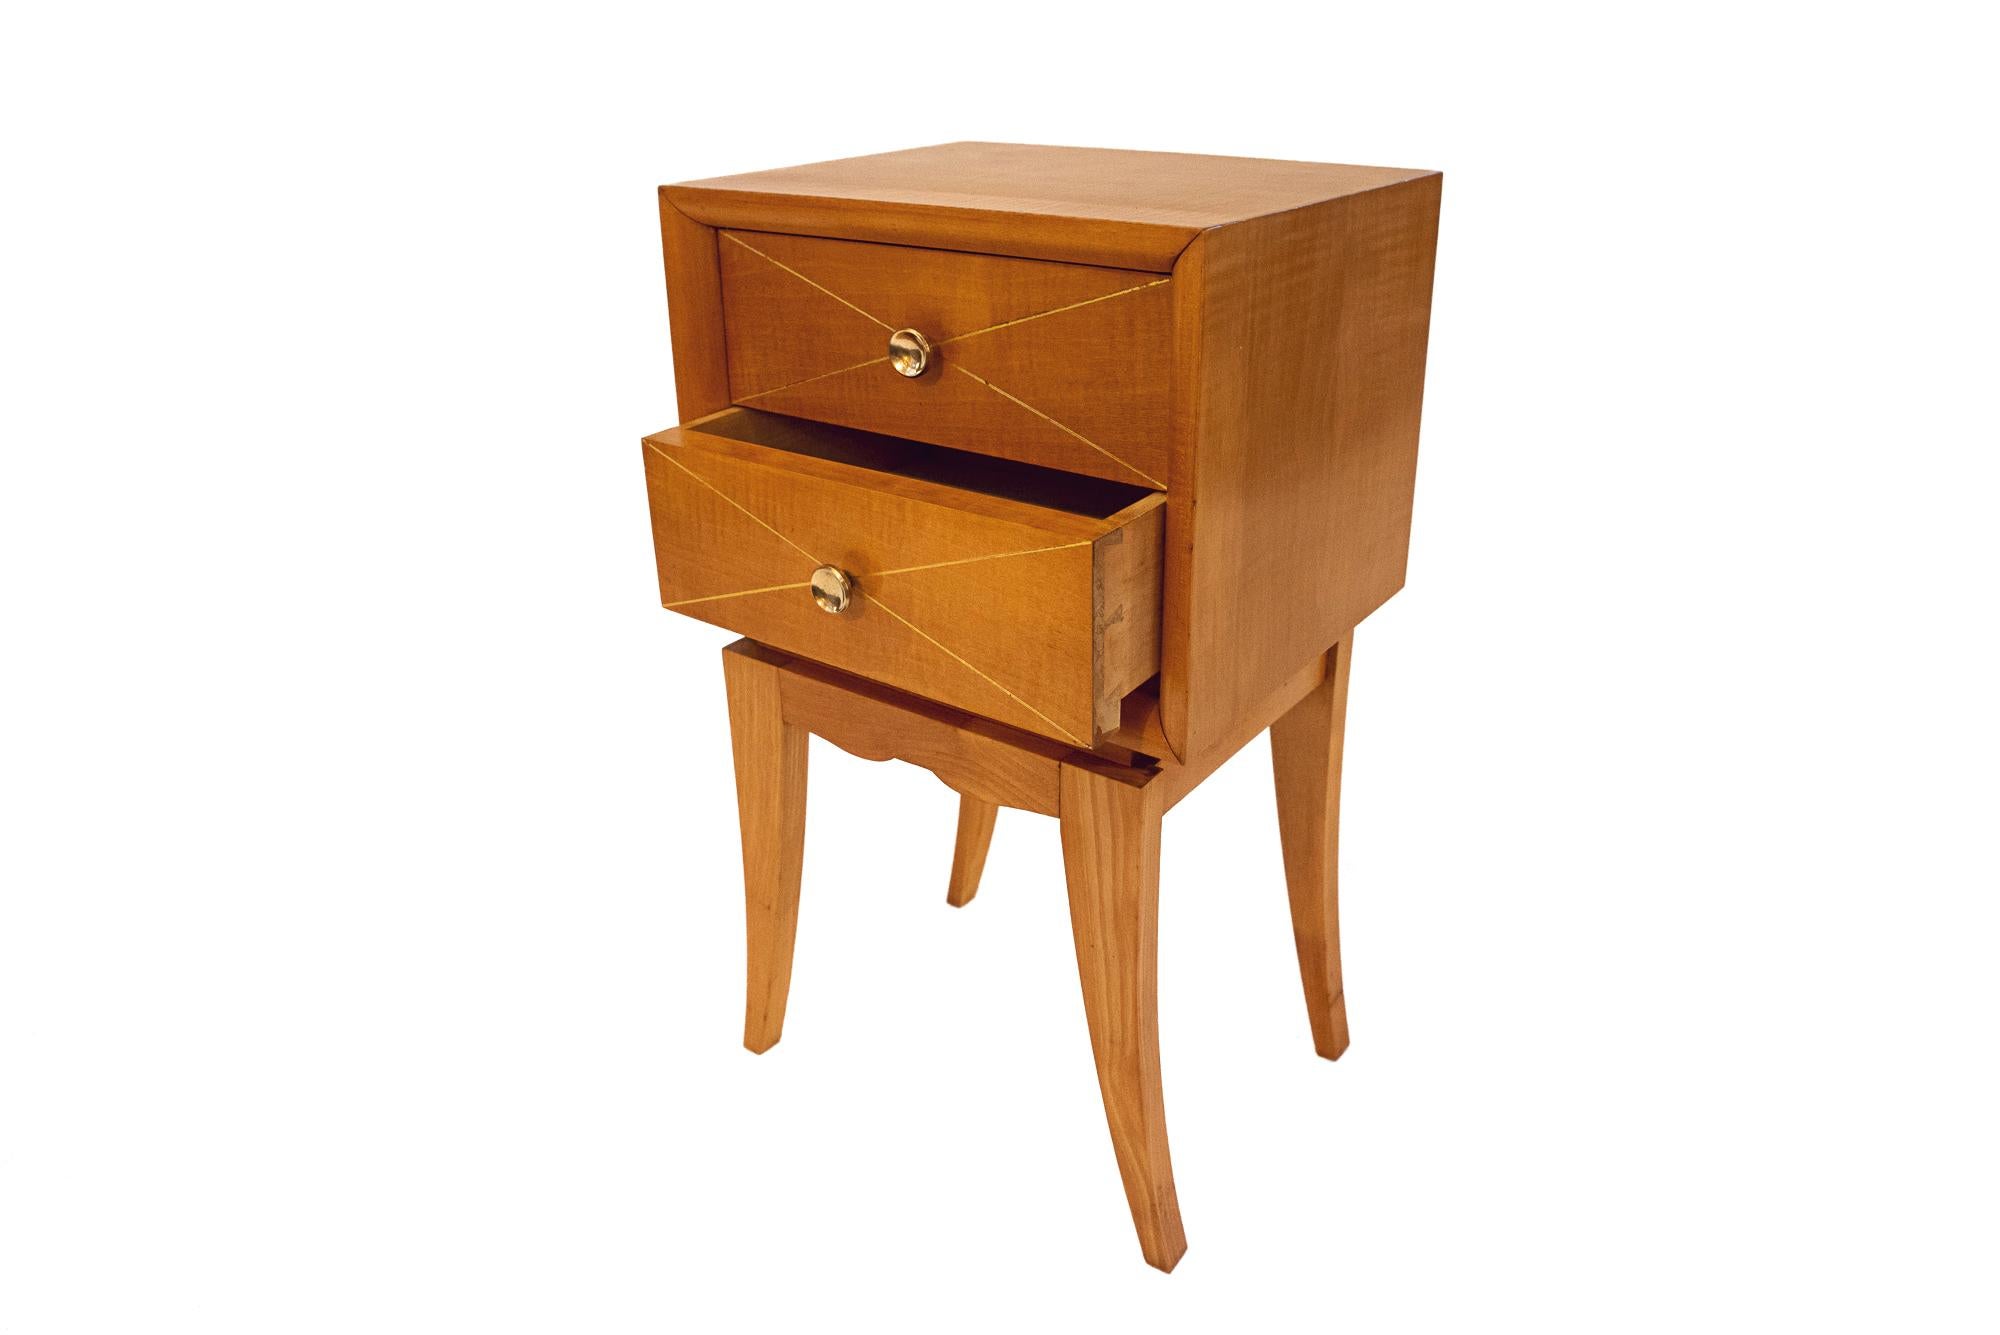 Mid-Century Modern Pair of Nightstands by Suzanne Guiguichon, Wood, circa 1970, France